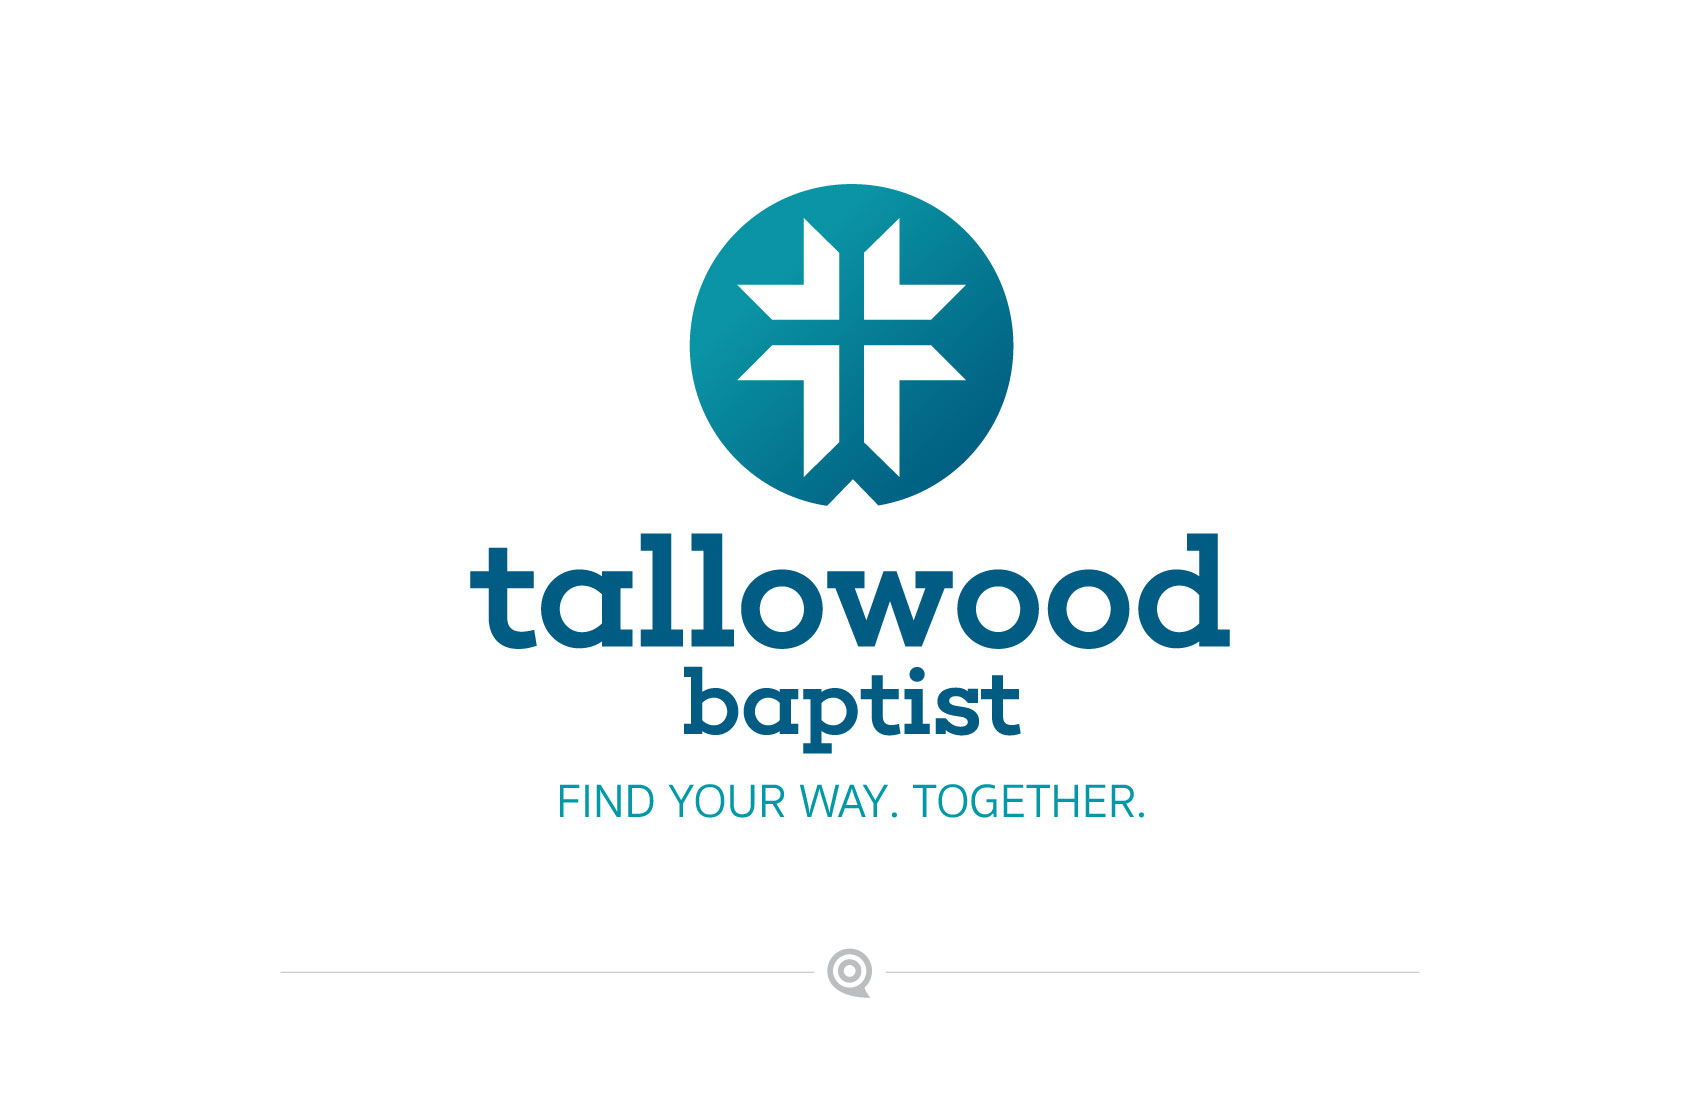 Tallowood Baptist Church Logo | Find Your Way. Together.